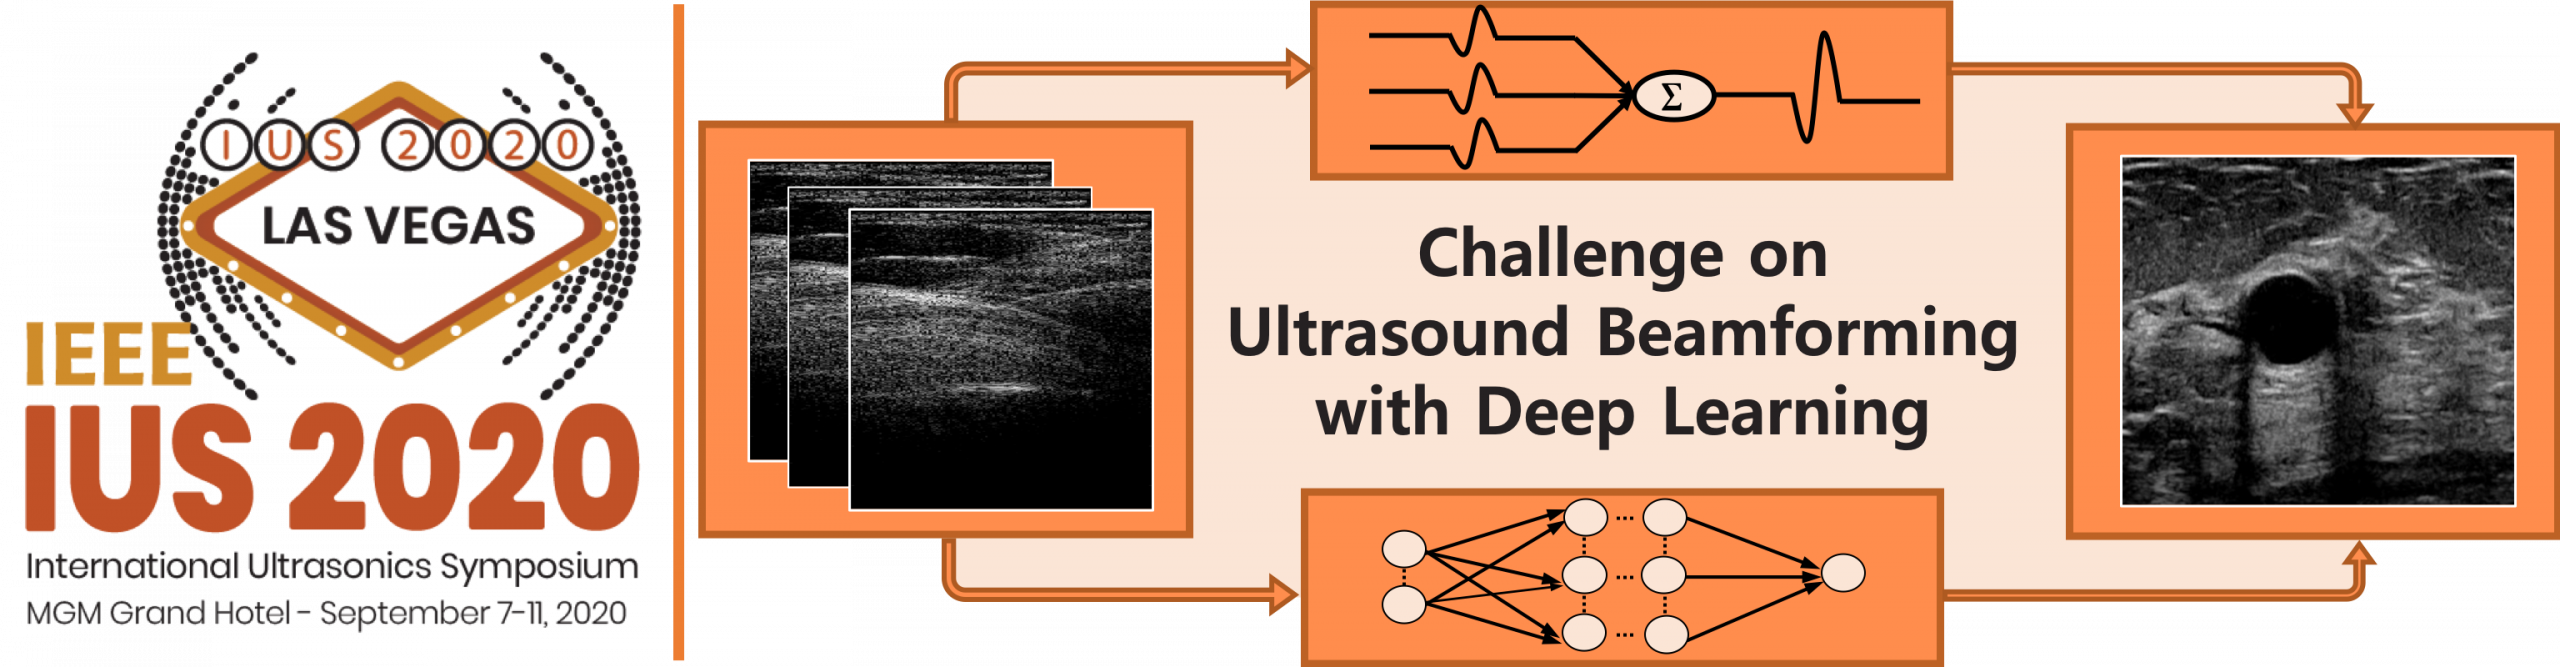 Challenge on Ultrasound Beamforming with Deep Learning